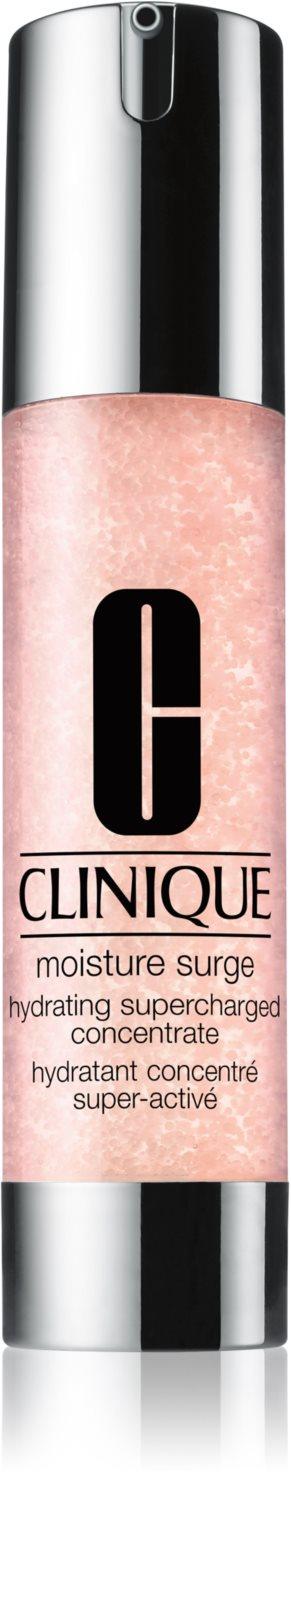 Clinique Moisture Surge™ Hydrating Supercharged Concentrate Gel For Dehydrated Skin - Perfume Oasis